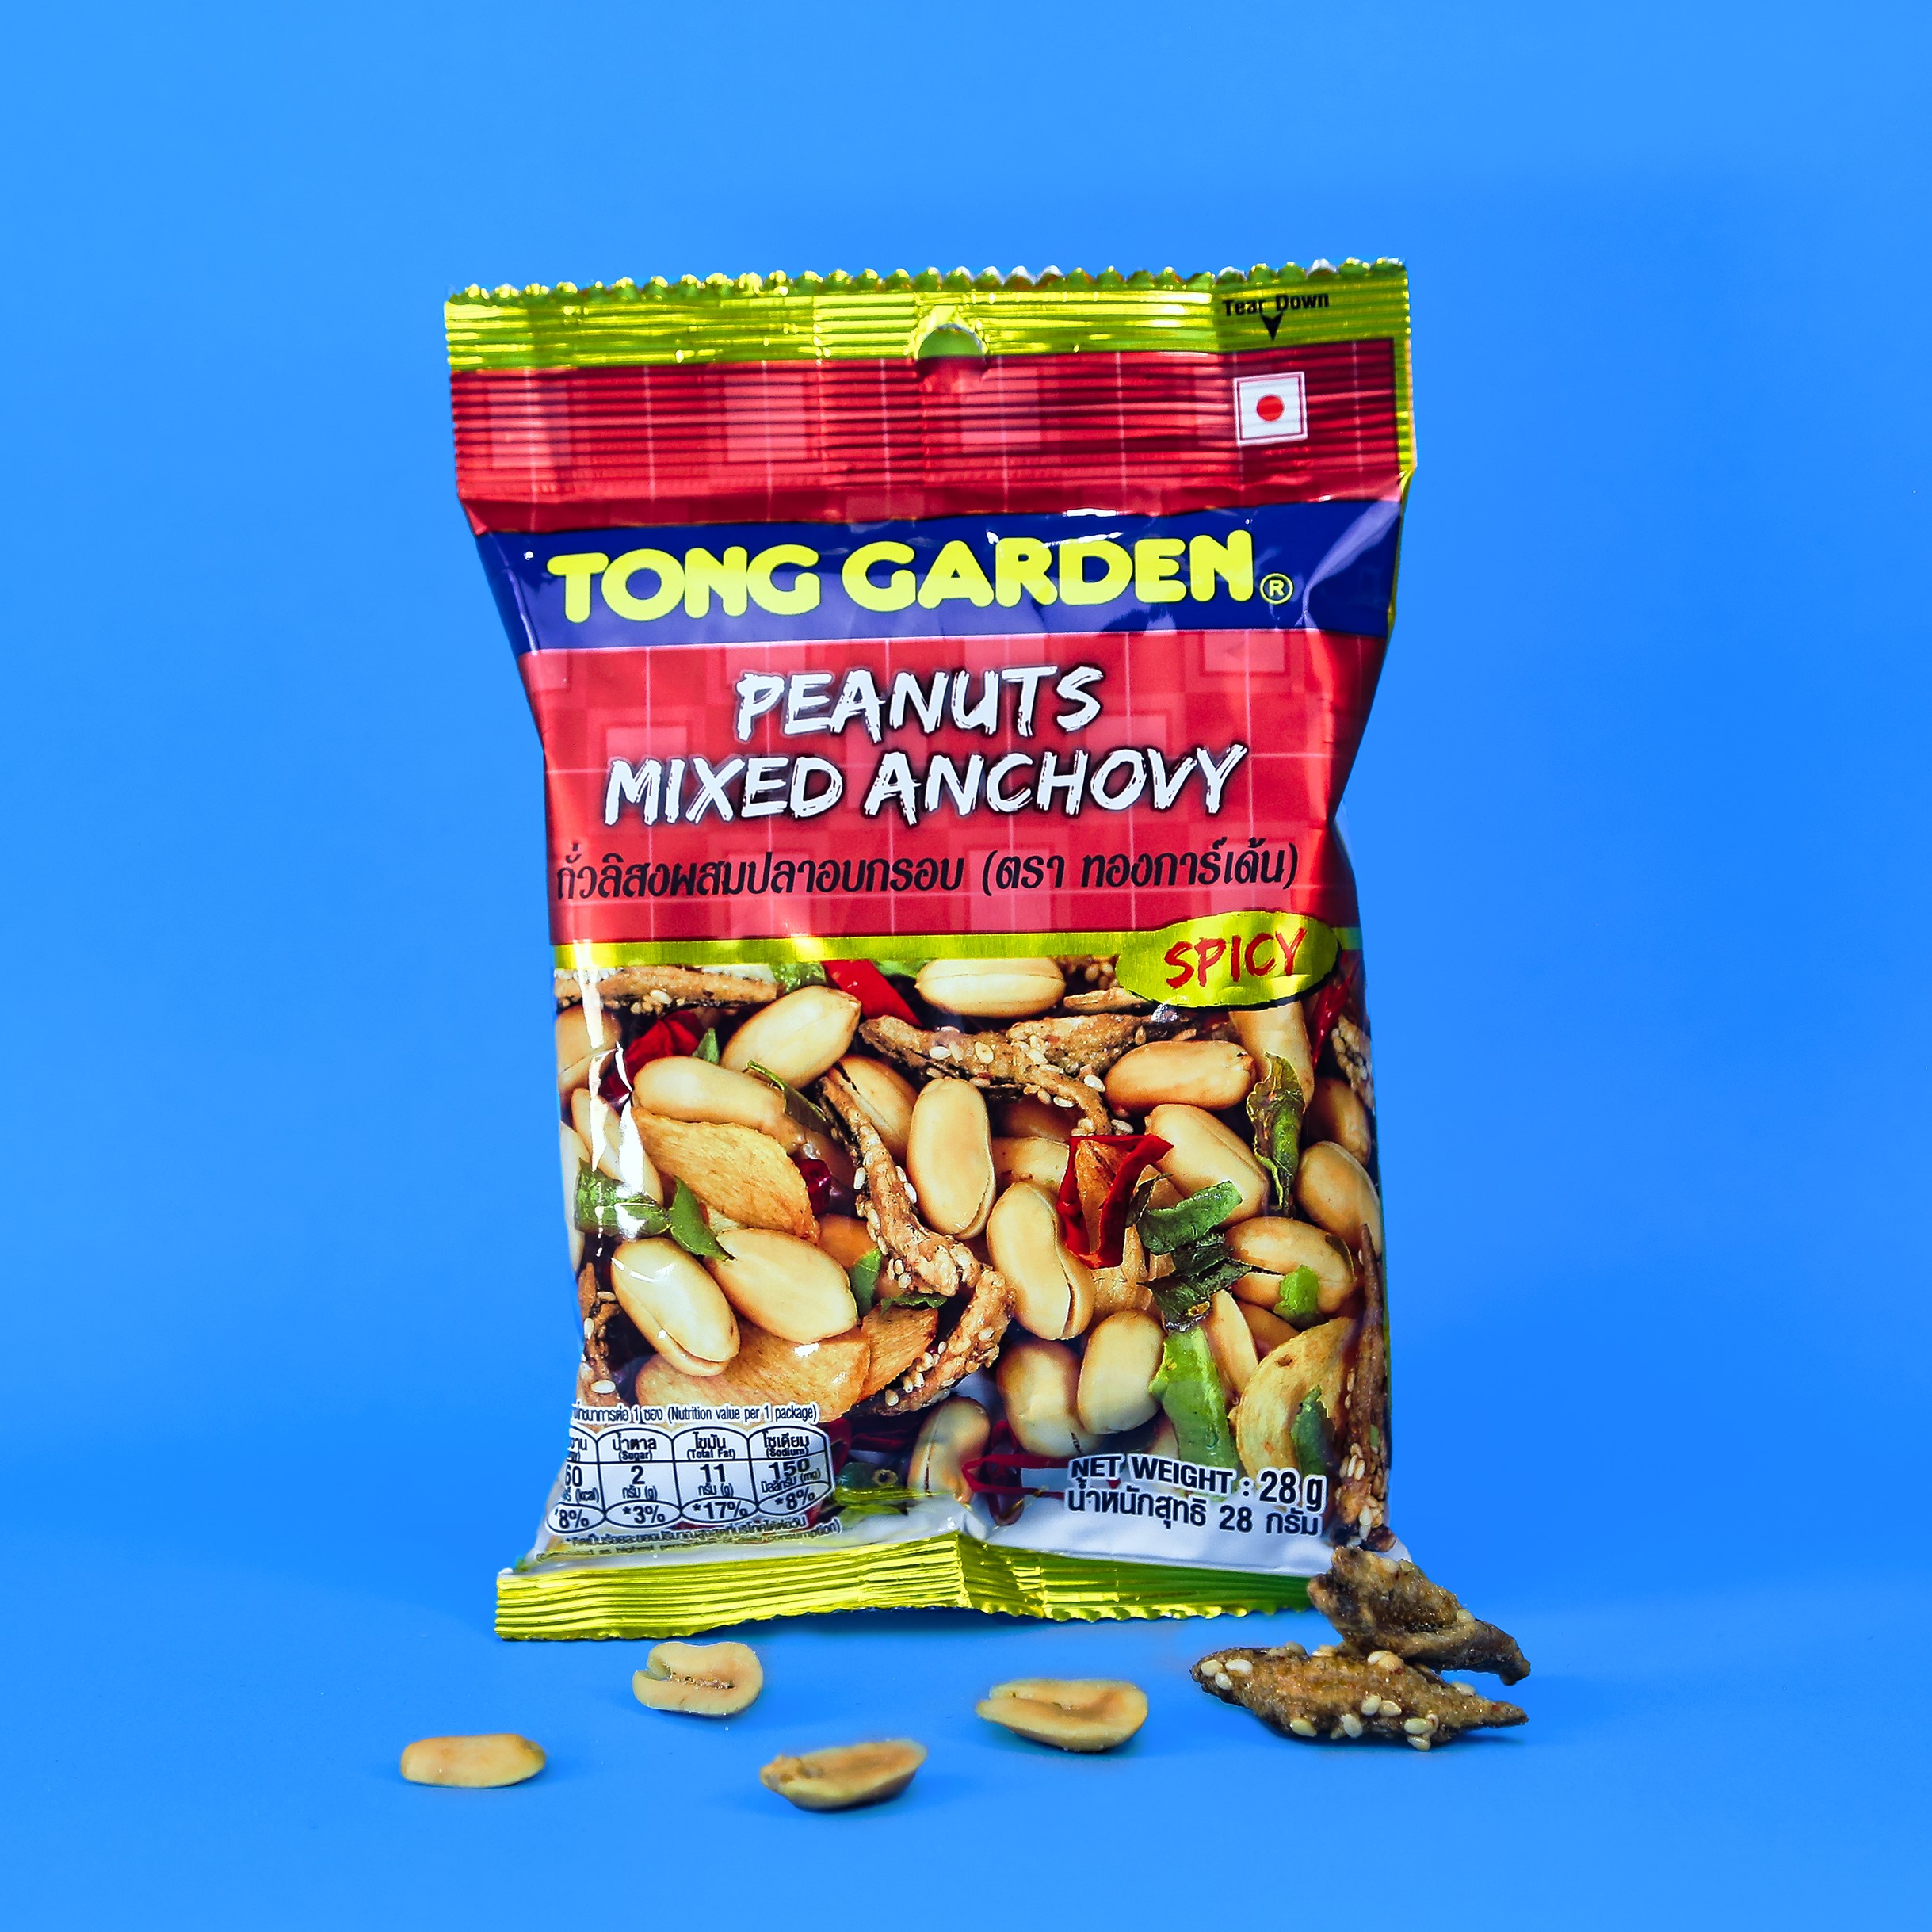 Tong Garden Peanuts mixed anchovy and dried chilli. Spicy flavored Thai peanut snack with kaffir lime leaf and sesame